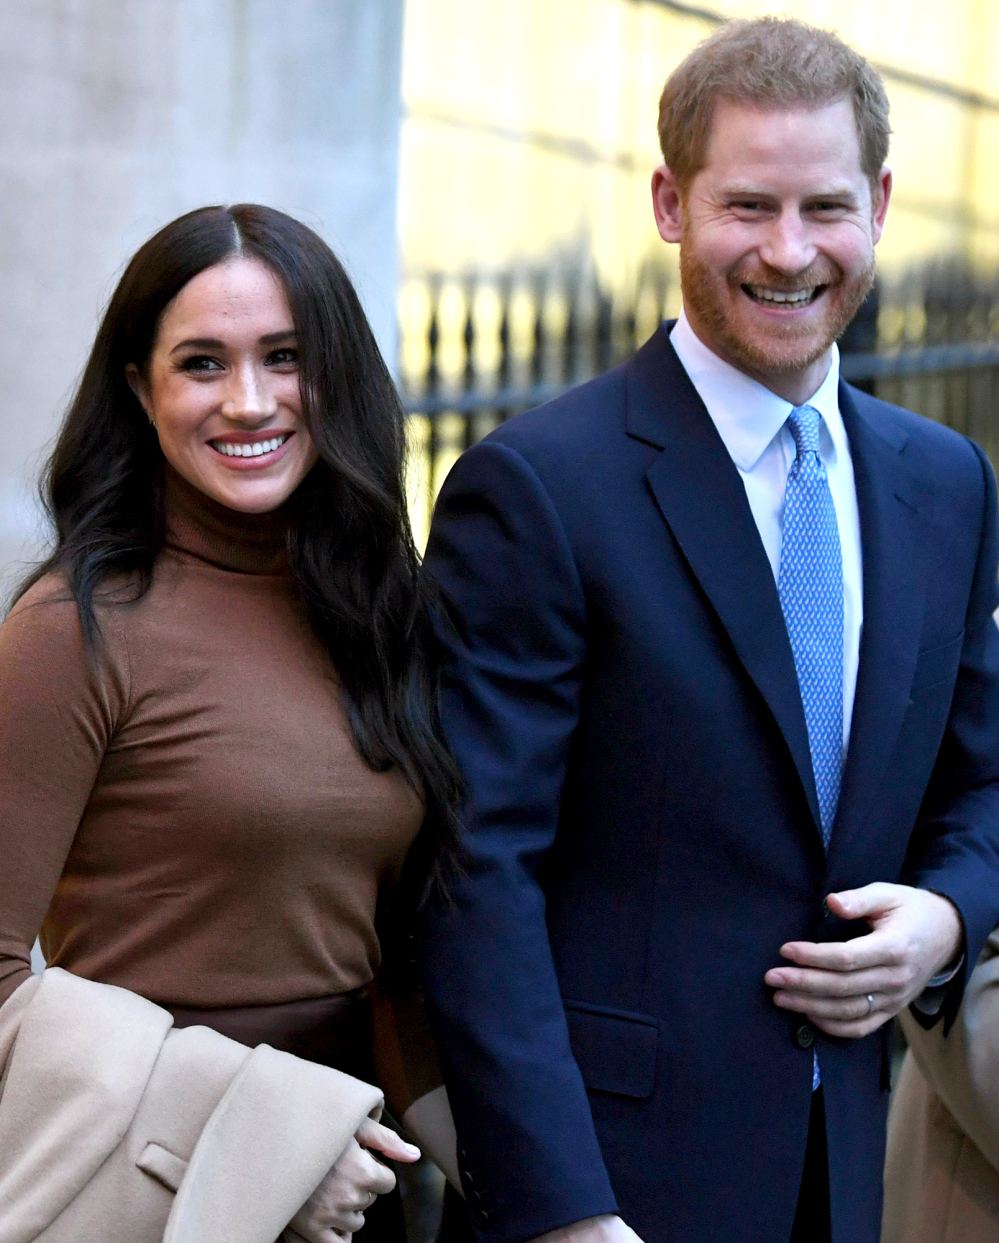 Prince Harry and Meghan Markle Sign New Deal With Speaking Agency Following Royal Stepback